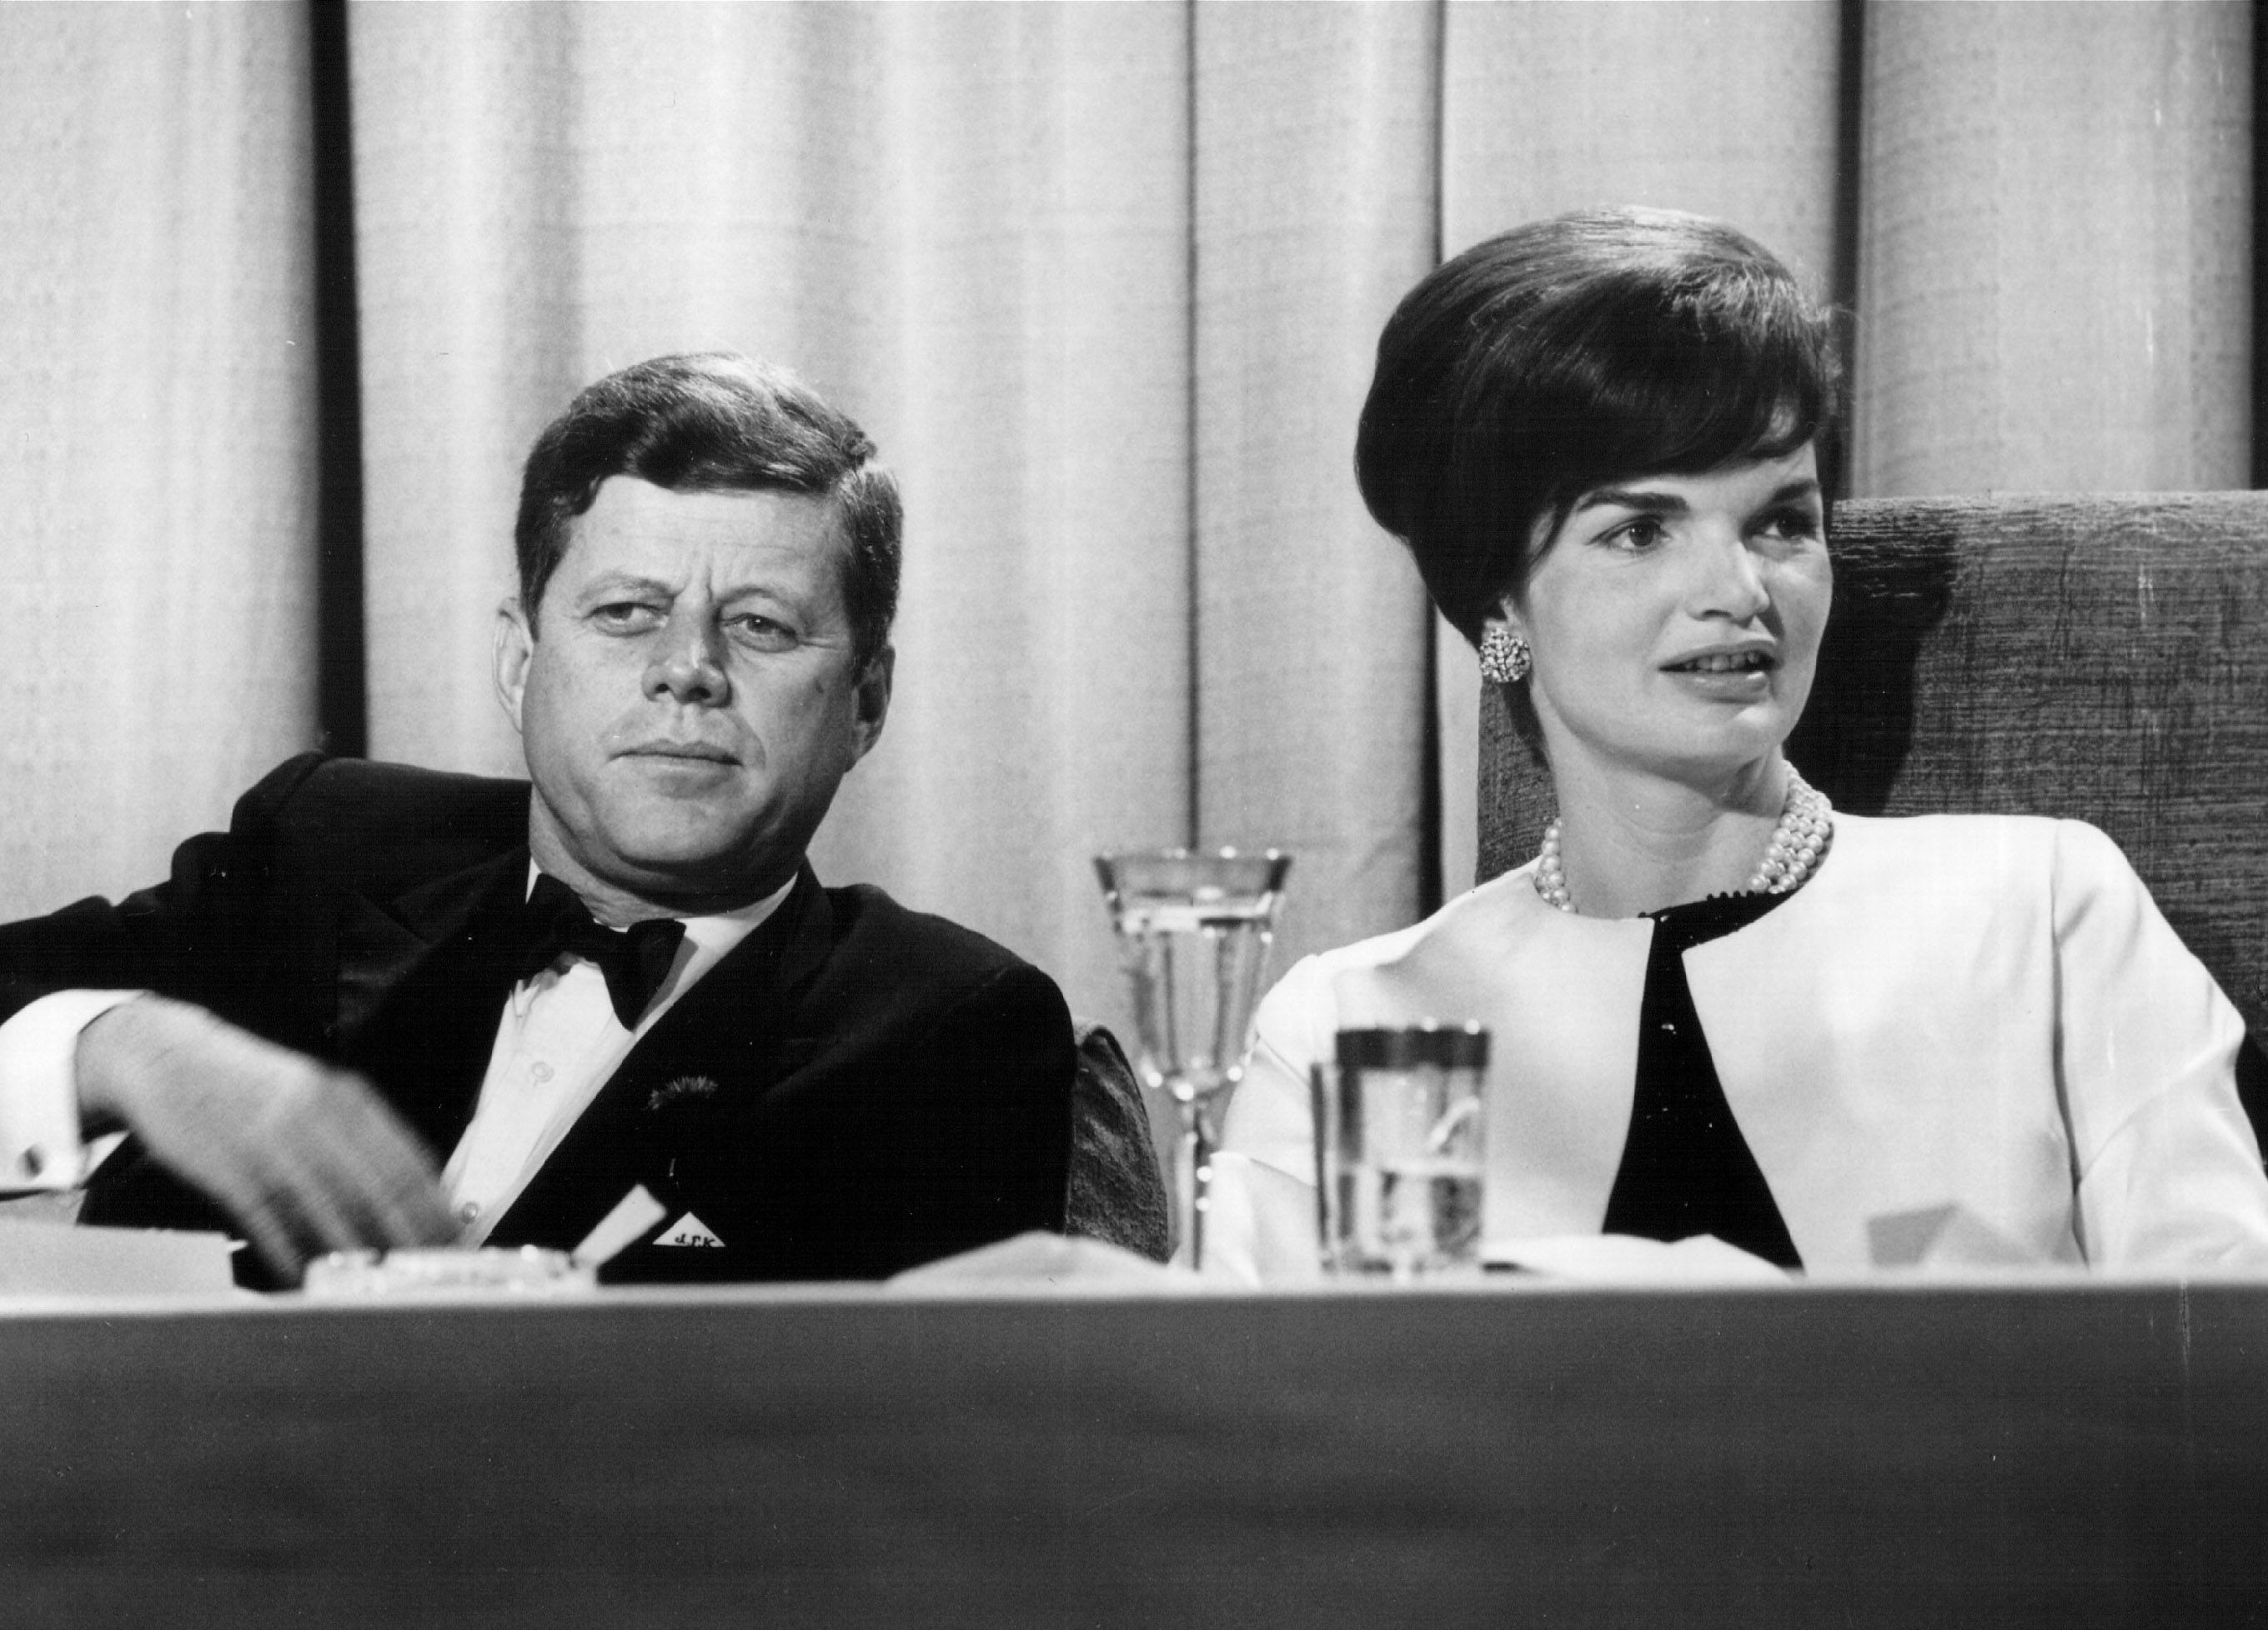 President John F. Kennedy and First Lady Jackie Kennedy seated at a table